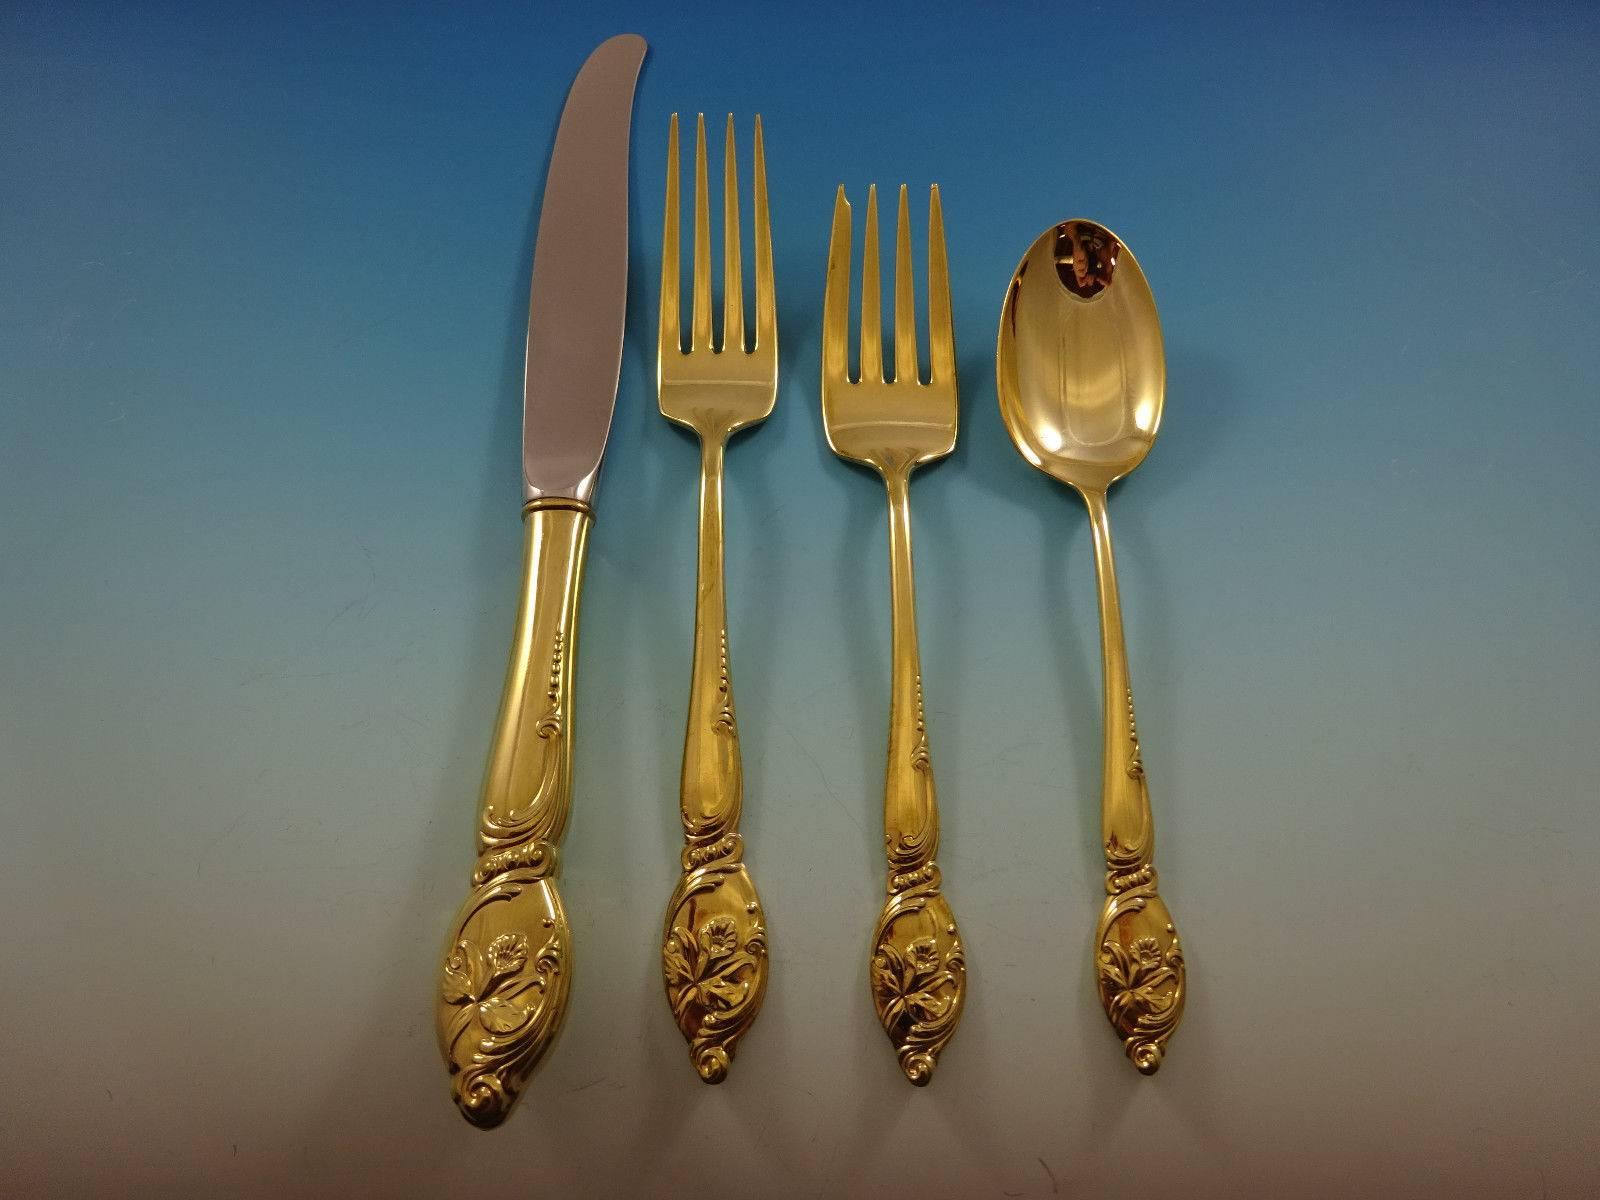 Enchanting orchid gold by Westmorland sterling silver flatware set - 48 pieces. 

Gold flatware is on trend and makes a bold statement on your table, especially when paired with gold rimmed China and gold accents. This set is vermeil (completely